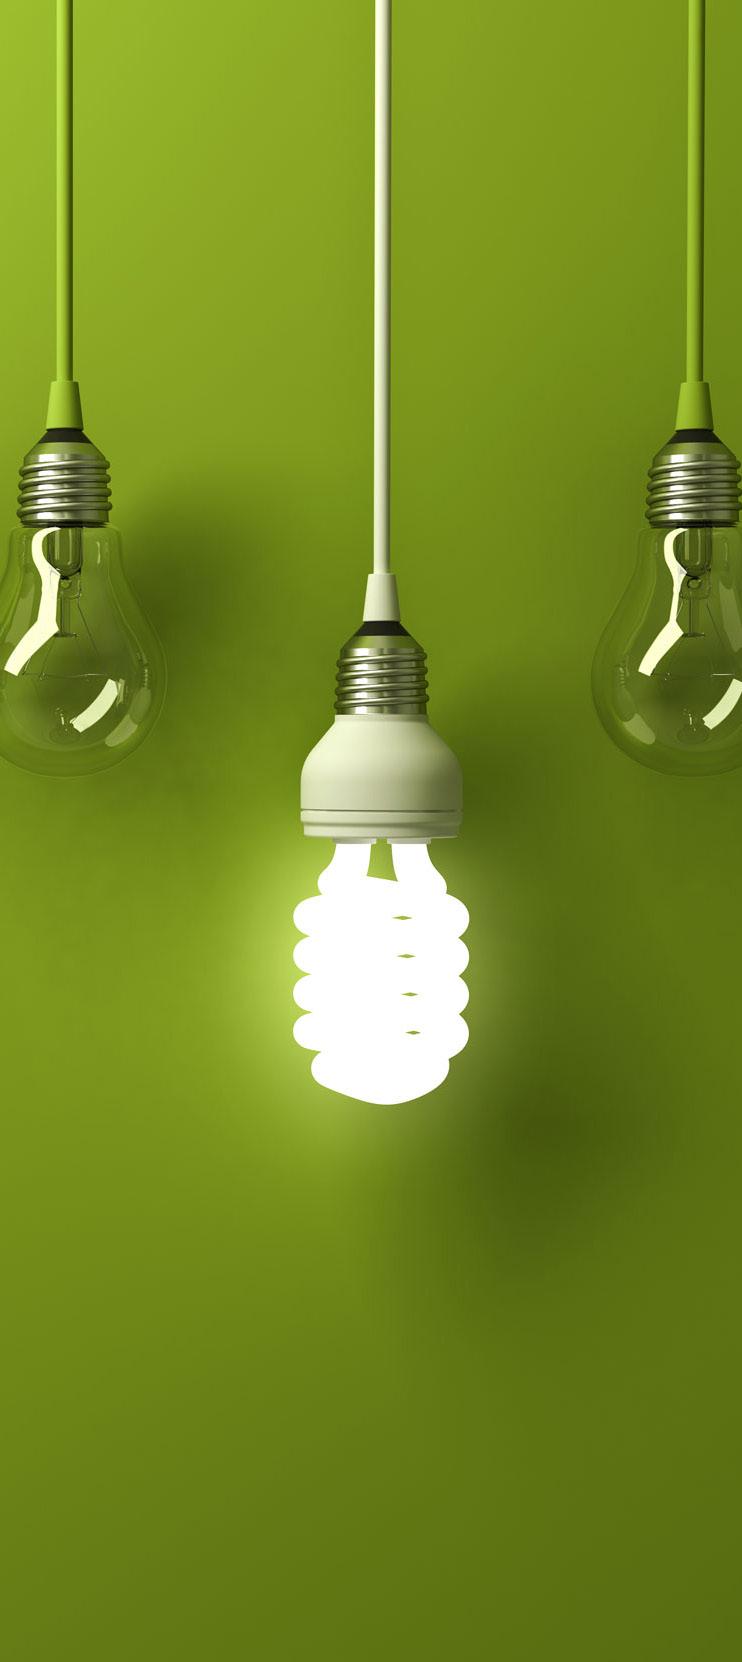 Minimum Energy Efficiency Standards (MEES): Impact on UK property management and valuation available to cover the full cost of purchasing and installing the improvement through: a Green Deal plan an